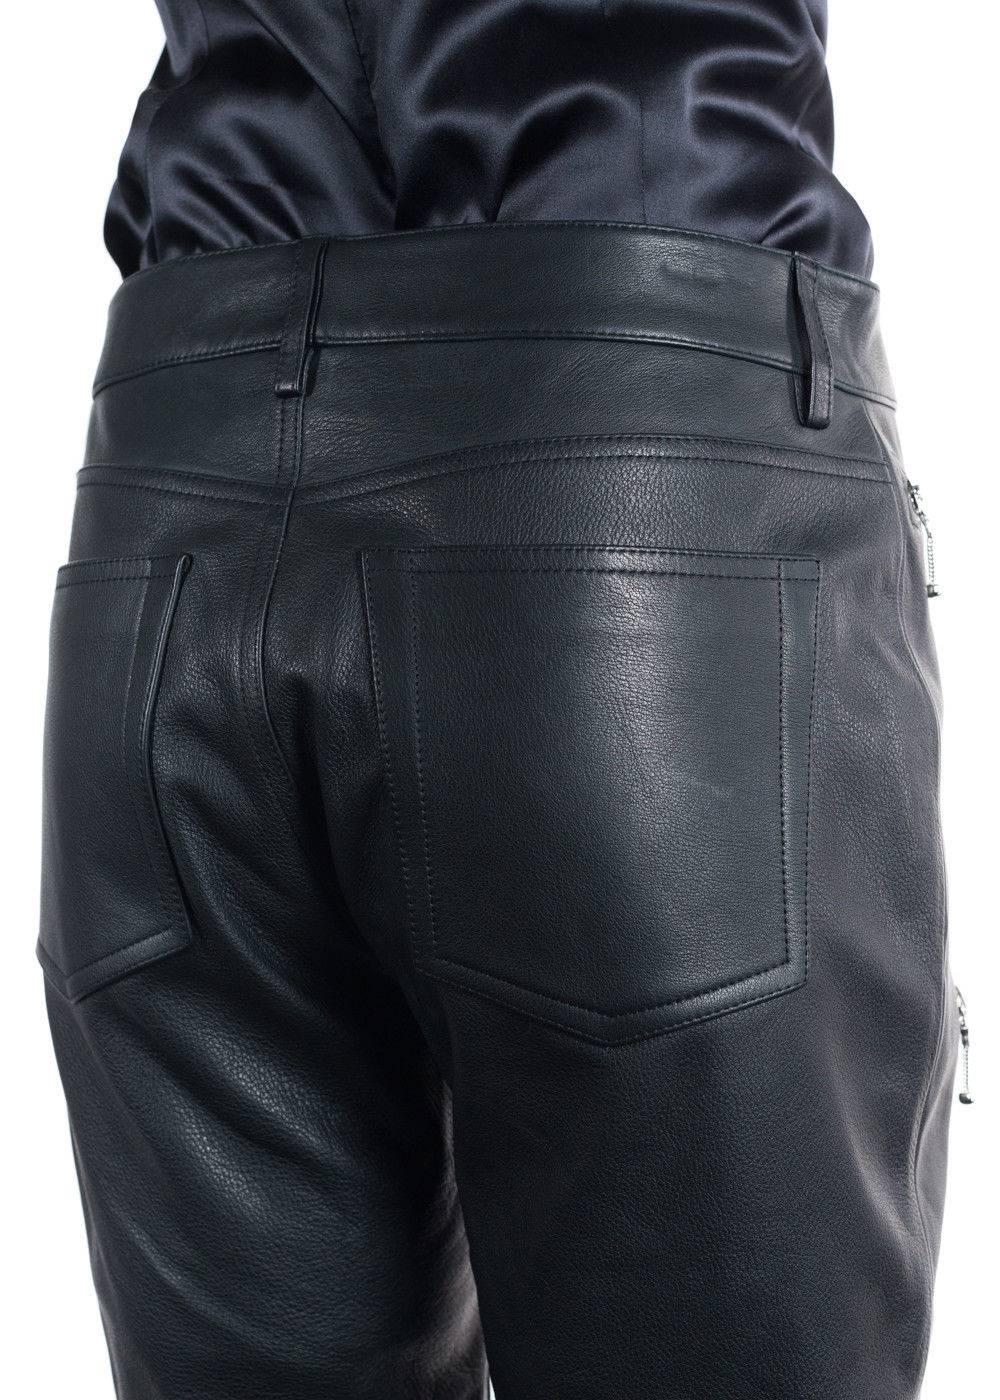 Brand New Alexander Wang Cropped Leather Biker Trousers
Original Tags 
Retails in Stores & Online for $1995
Size EUR 38 / US 2

These Alexander Wang Cropped trousers are perfect for that night out. These pants were designed in Italy using 100%